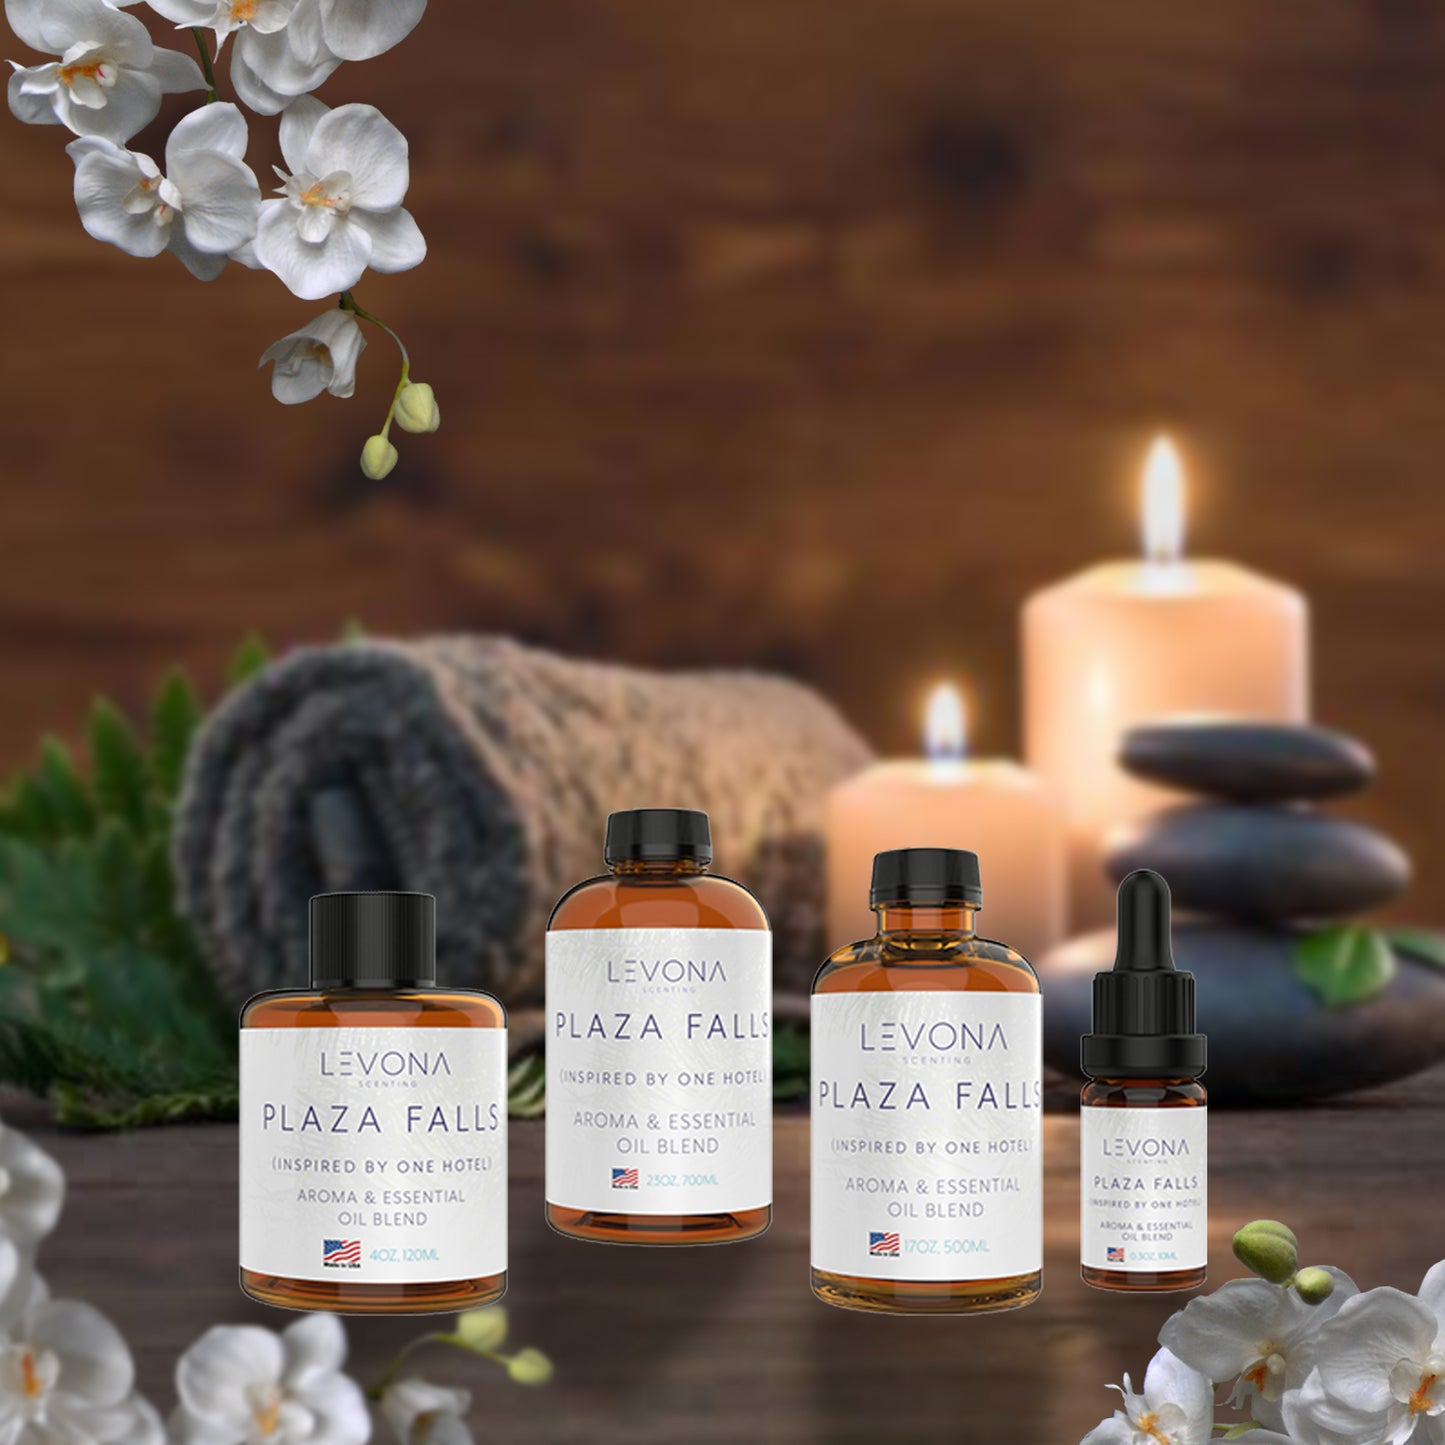 Levona Scent Plaza Falls (Inspired by One Hotel) Essential Oil